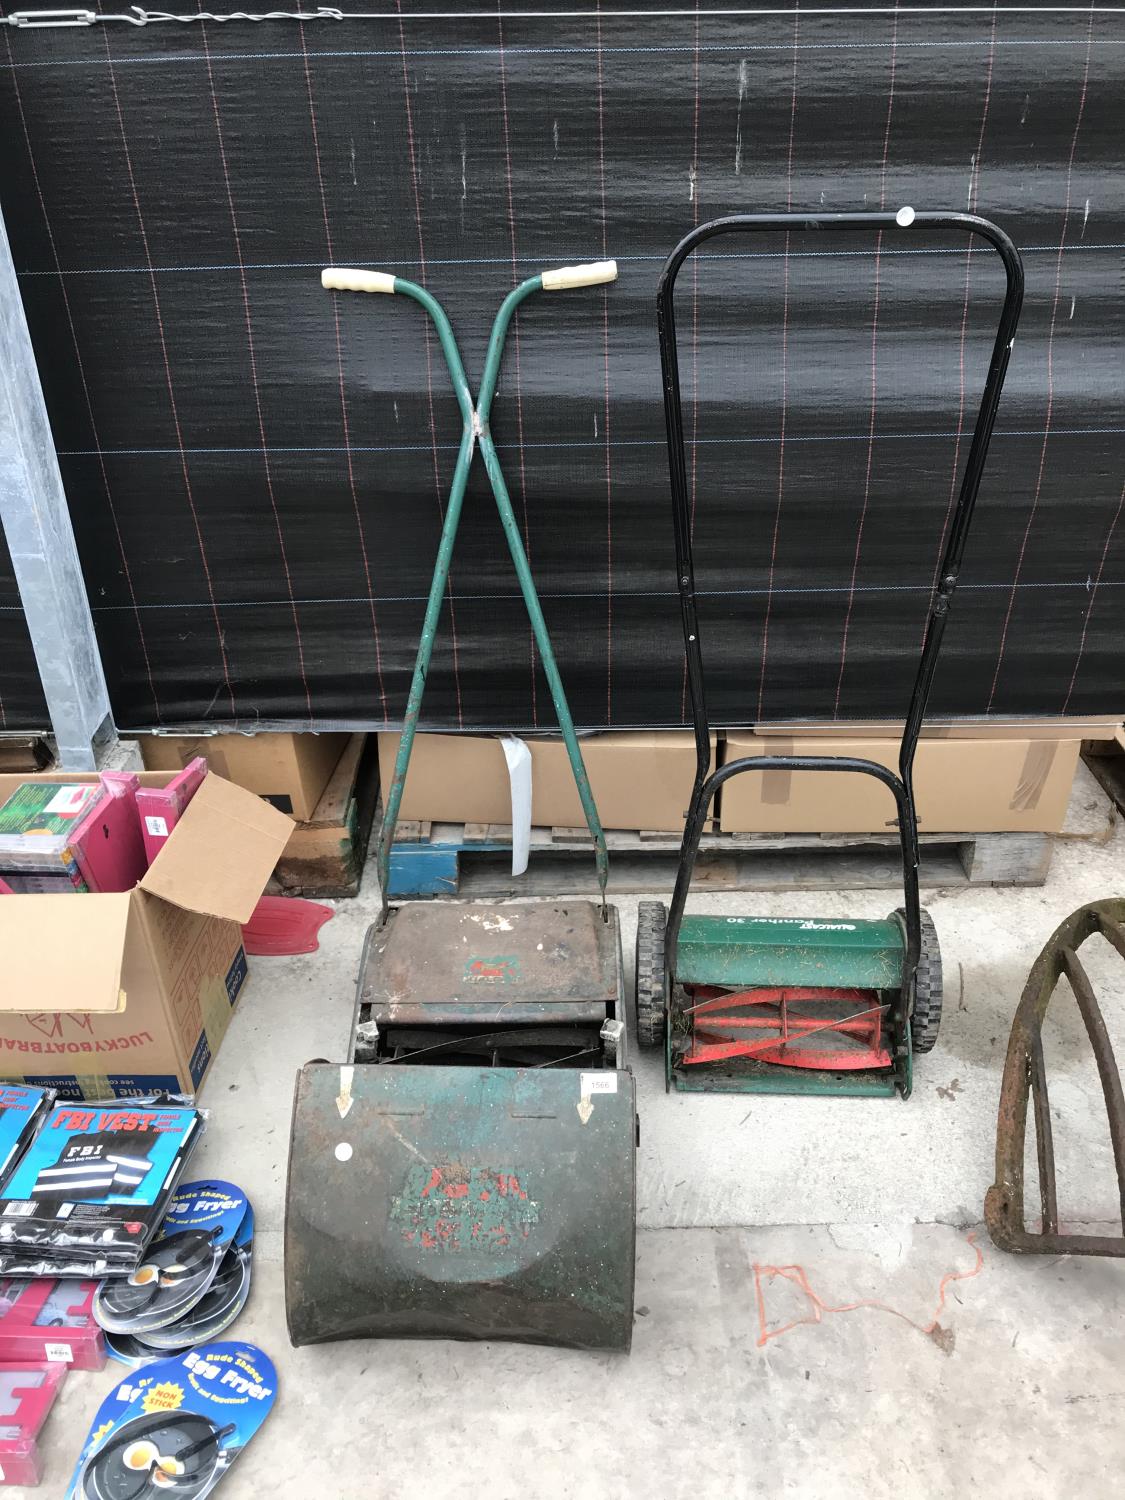 TWO VINTAGE LAWN MOWERS AND A FLOOR STEAMER